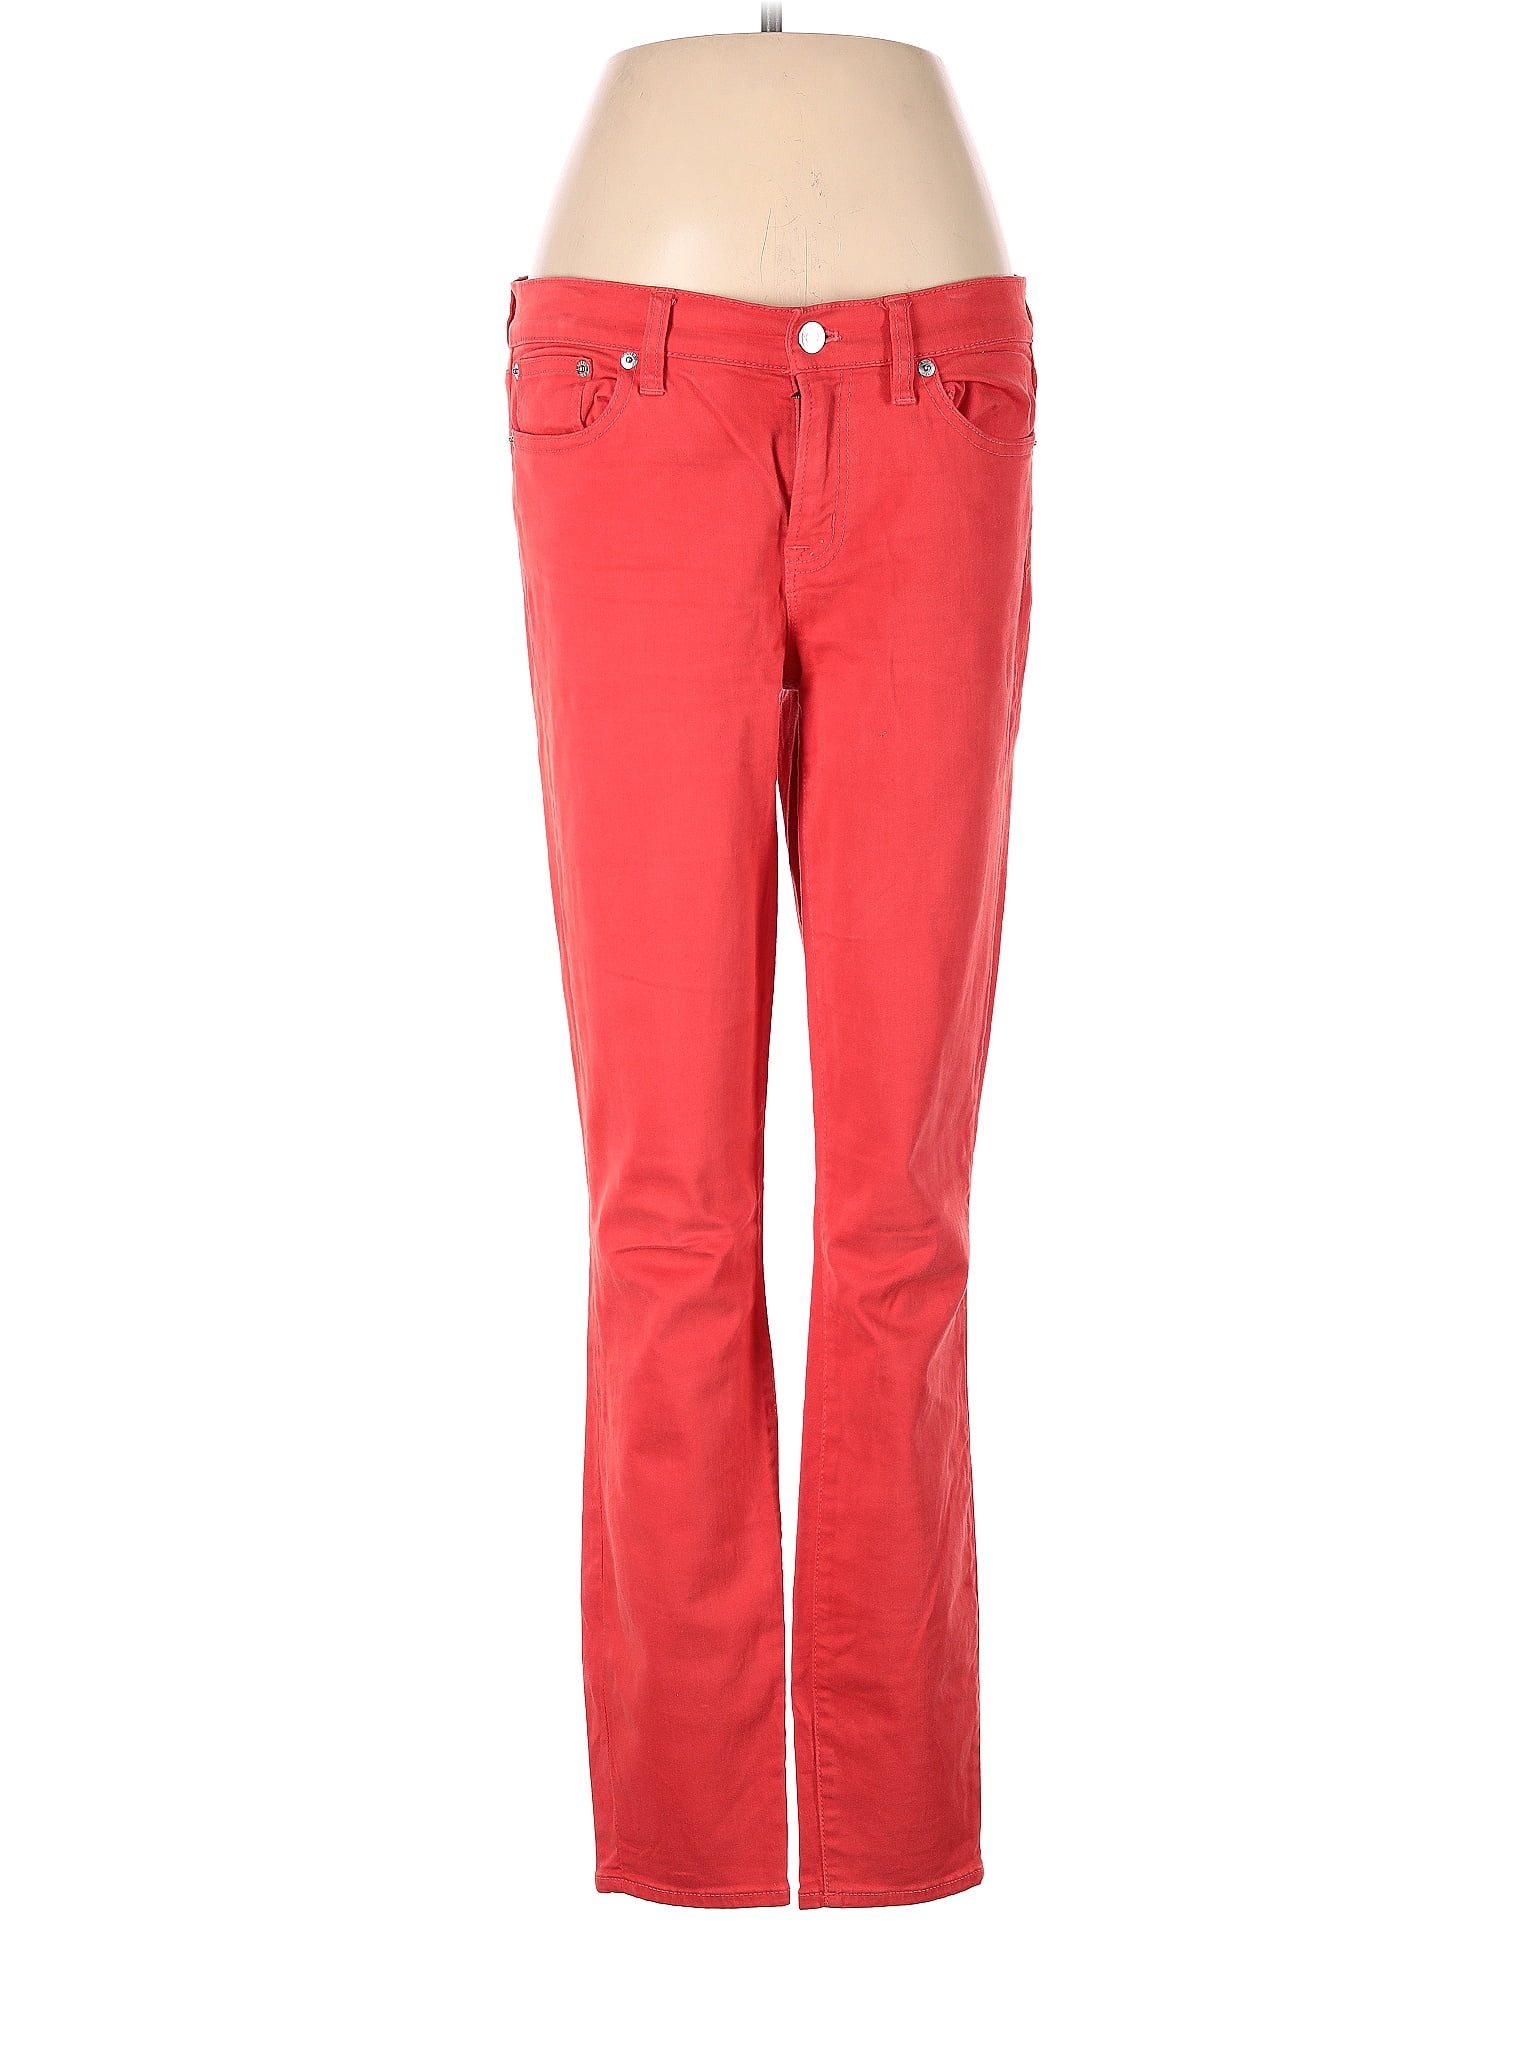 J.Crew Solid Red Jeans 29 Waist (Tall) - 81% off